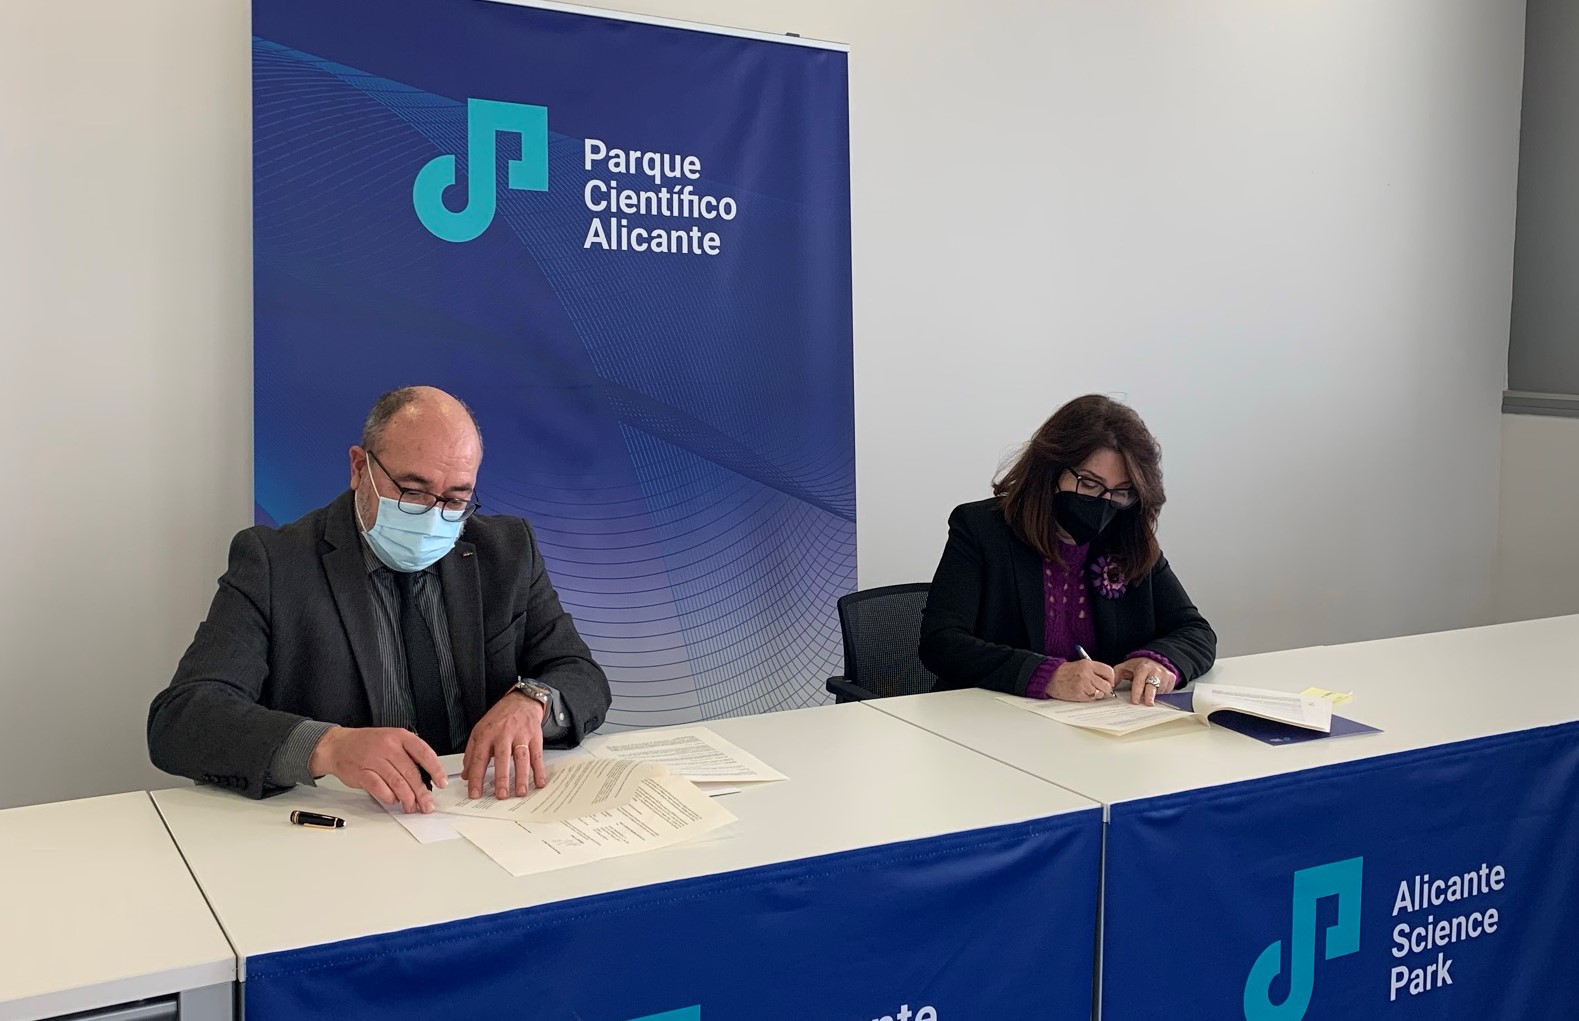 Amparo Navarro, dean of the University of Alicante (UA) and president of the Alicante Science Park Foundation (PCA) and Pablo Escribá, CEO of Laminar Pharmaceuticals, signing the contract.